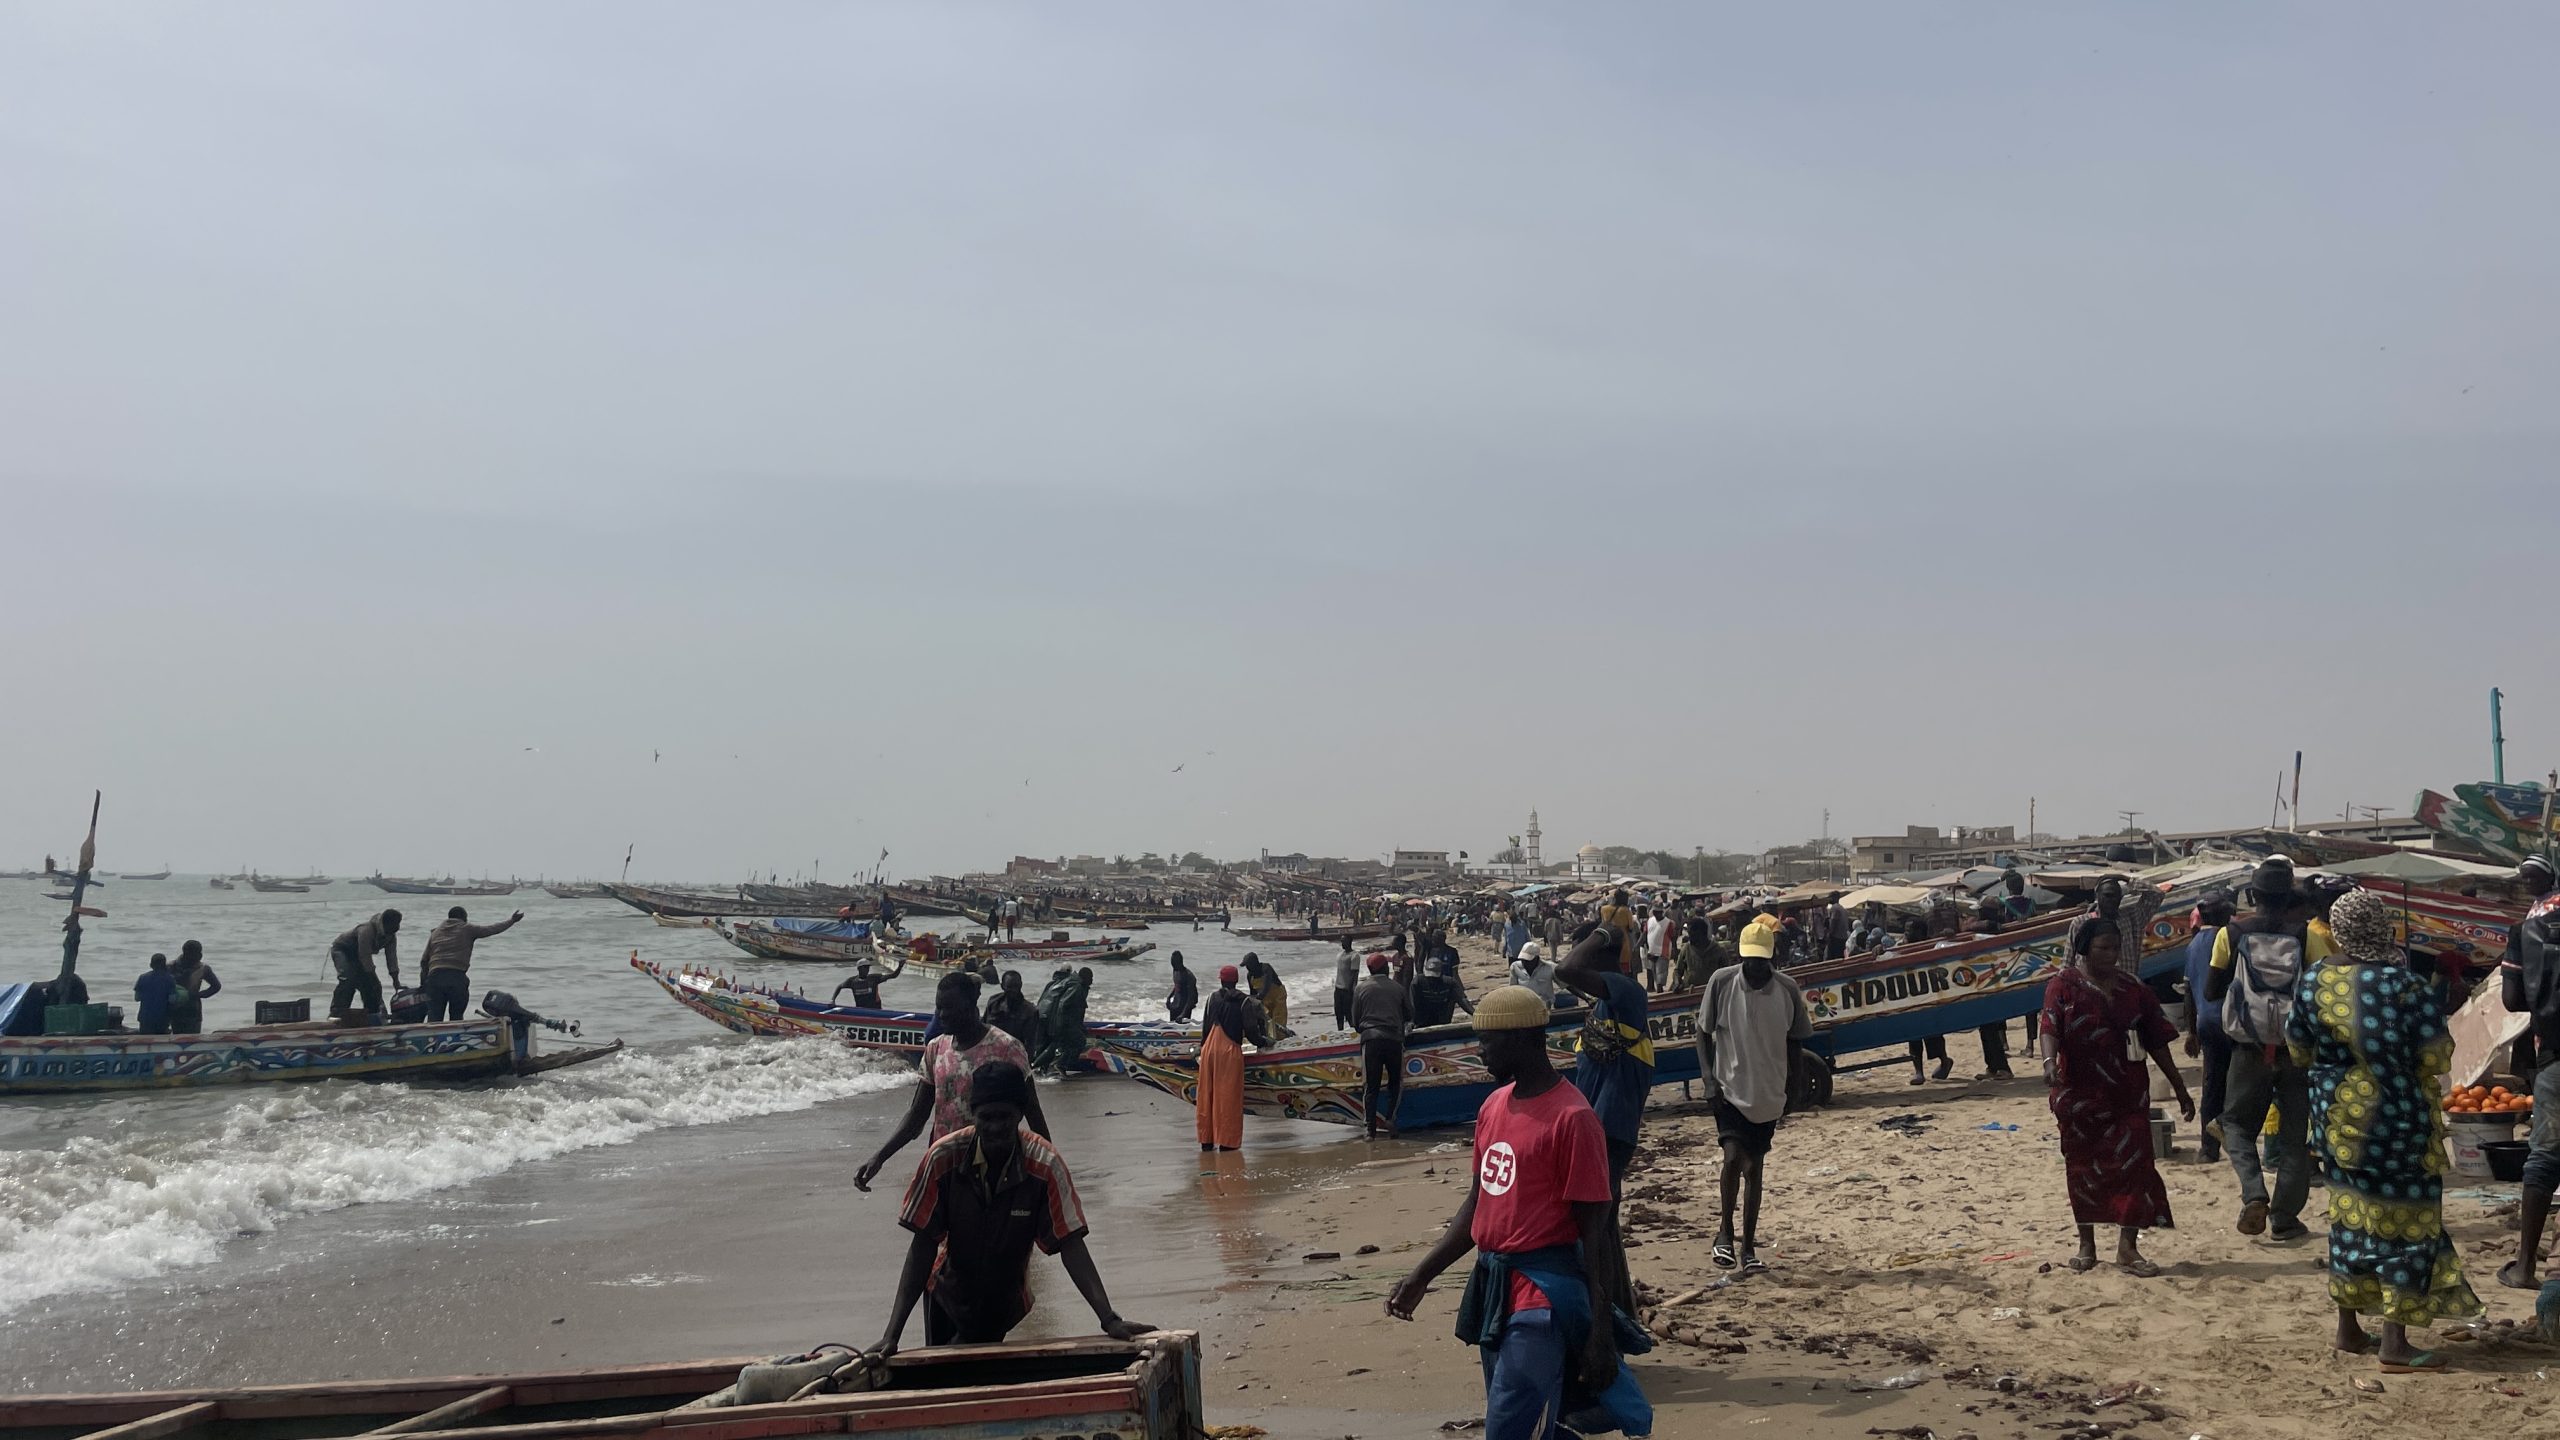 Hundreds of people gather at the beach of Mbour, Senegal, where fishermen unload the day's catch. The insurance arm of the World Bank, MIGA, used millions of its climate funds in chain hotels, while fishermen struggle with climate impacts.